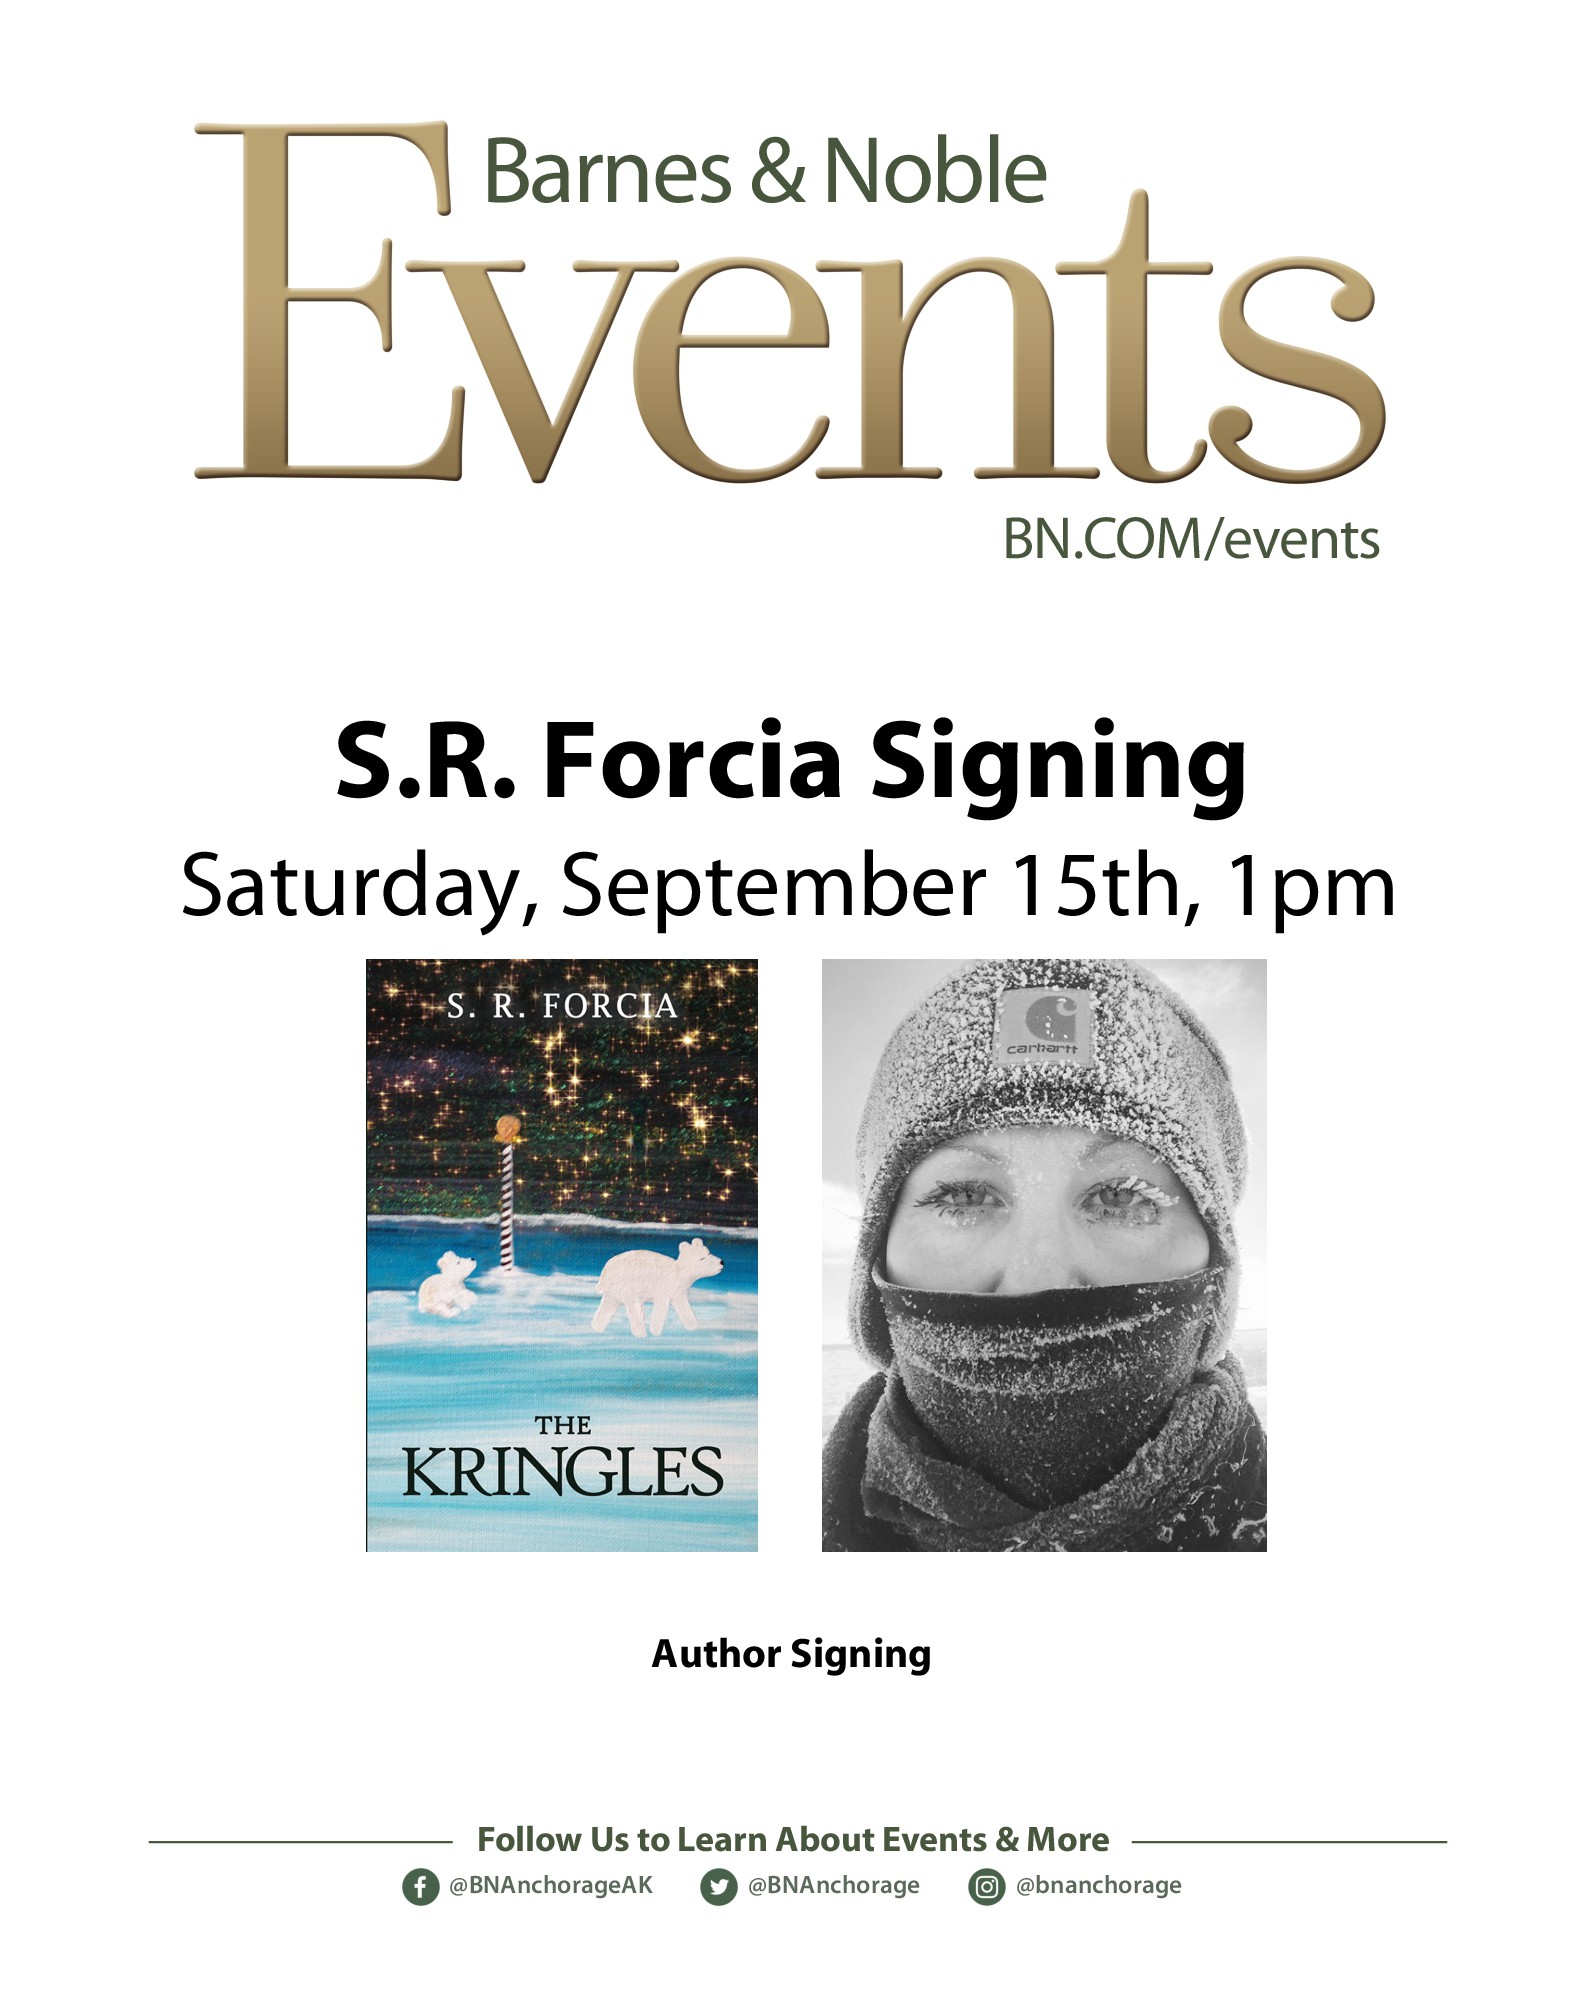 Barnes & Noble hosted an Author Signing event for ‘The Kringles’